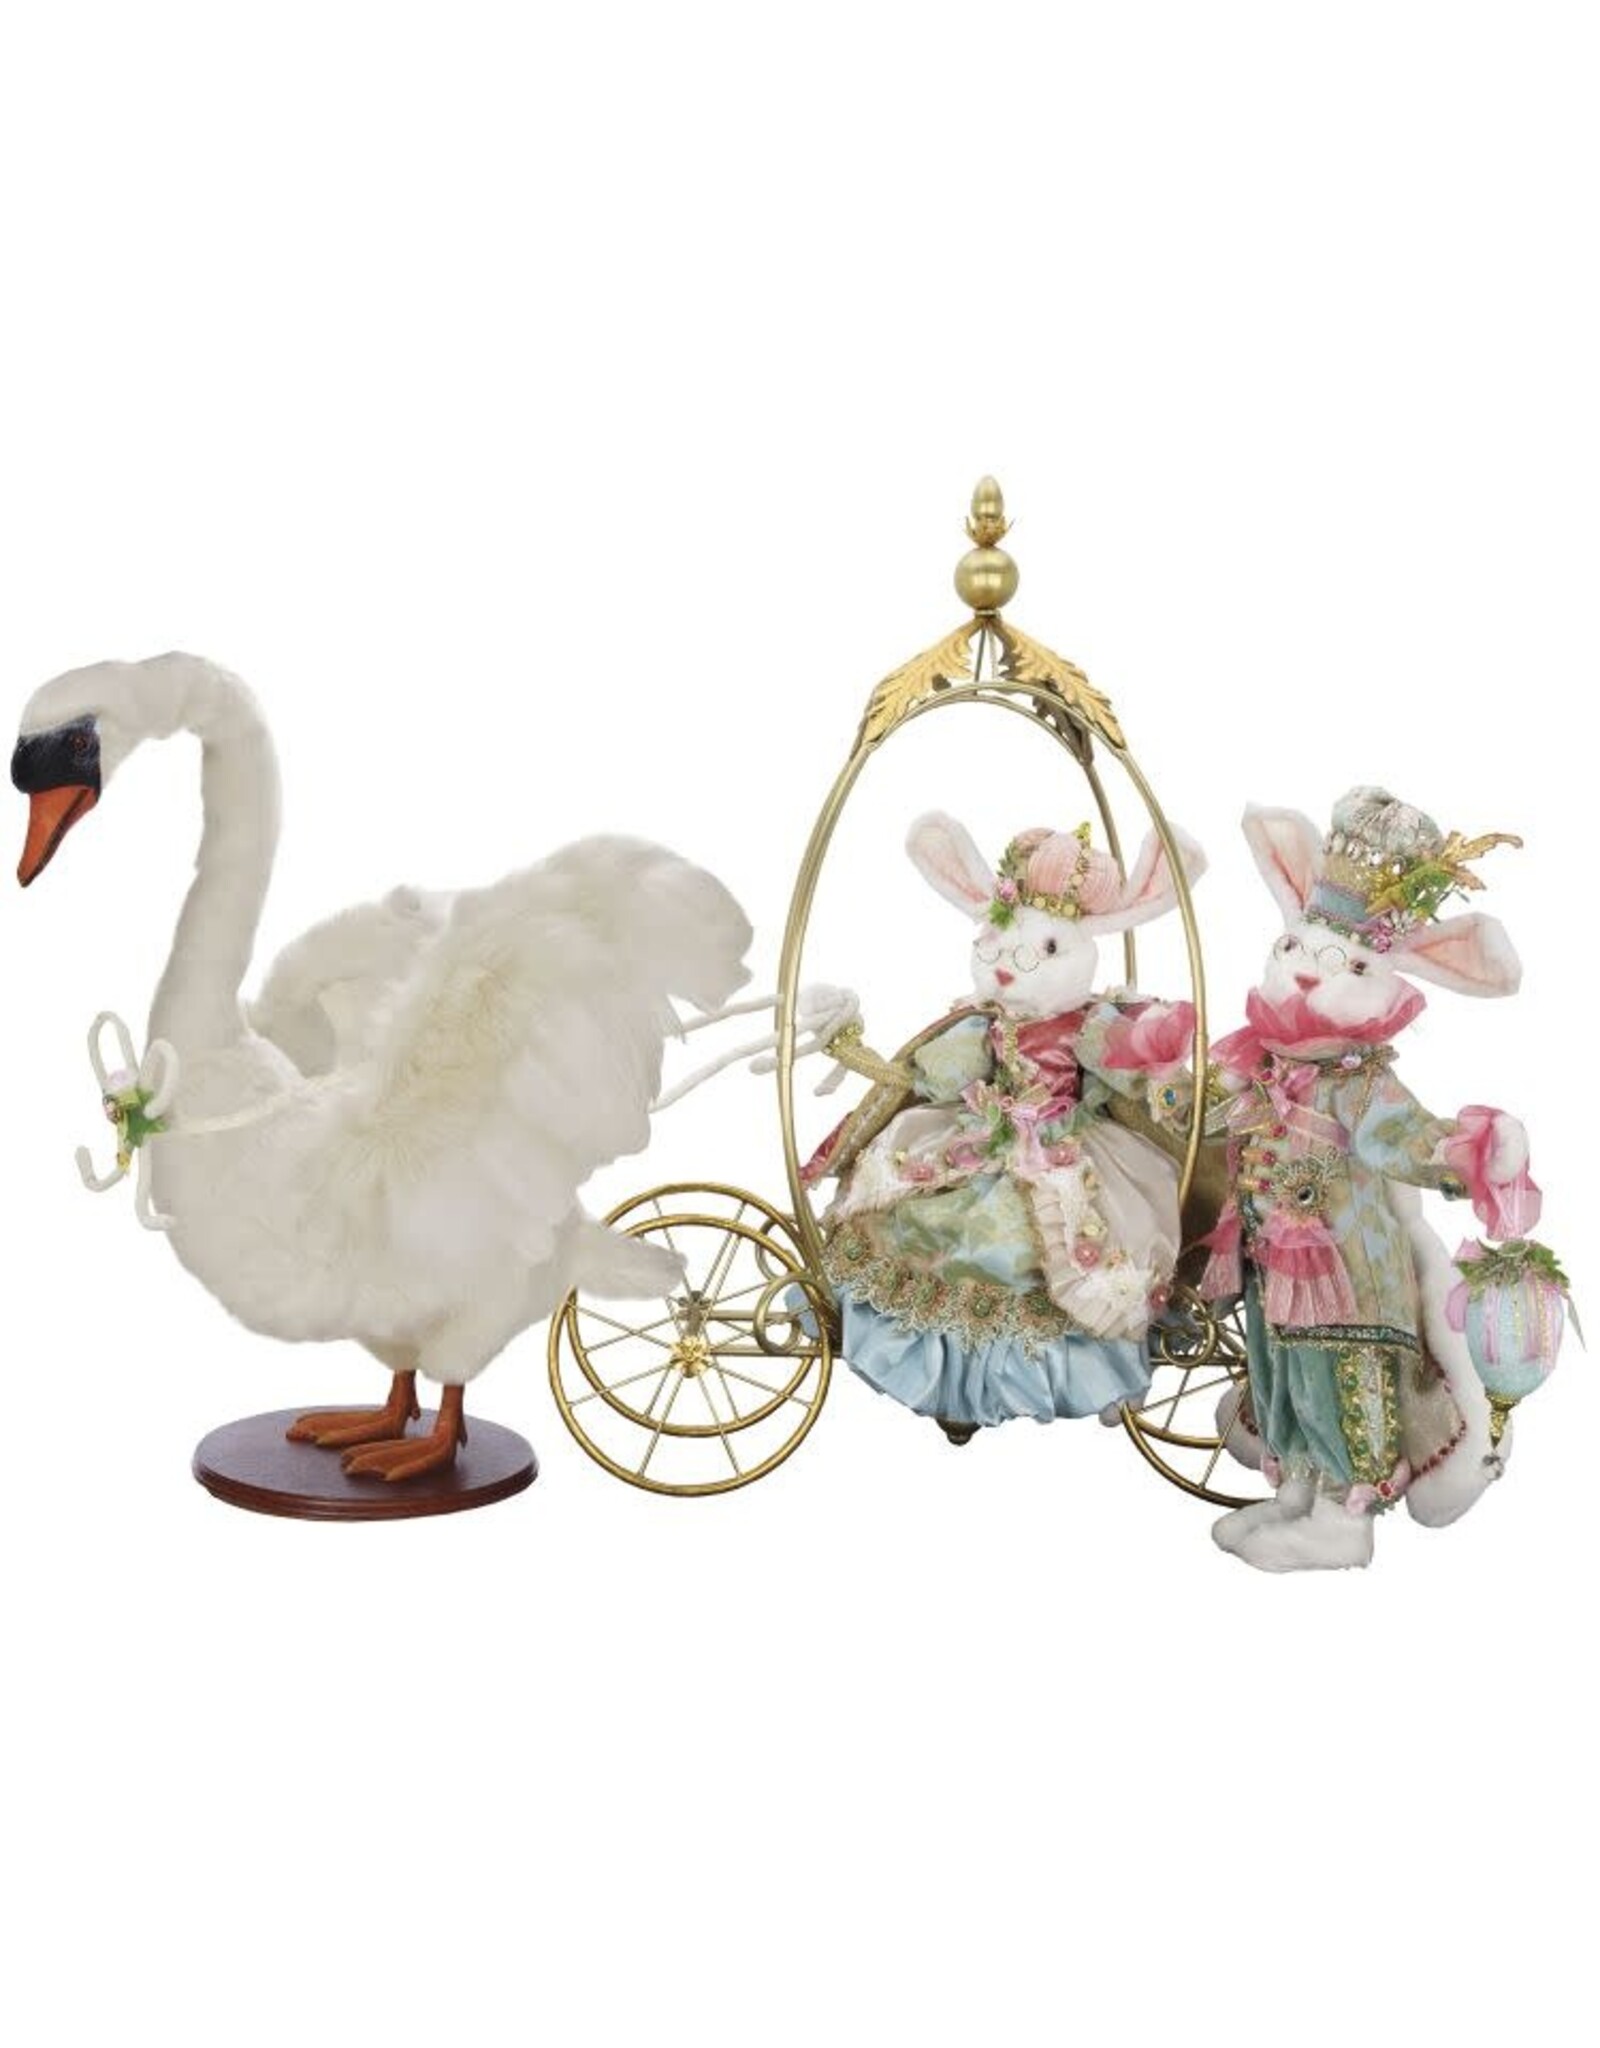 Mark Roberts Fairies Large Carriage 37 Inch A